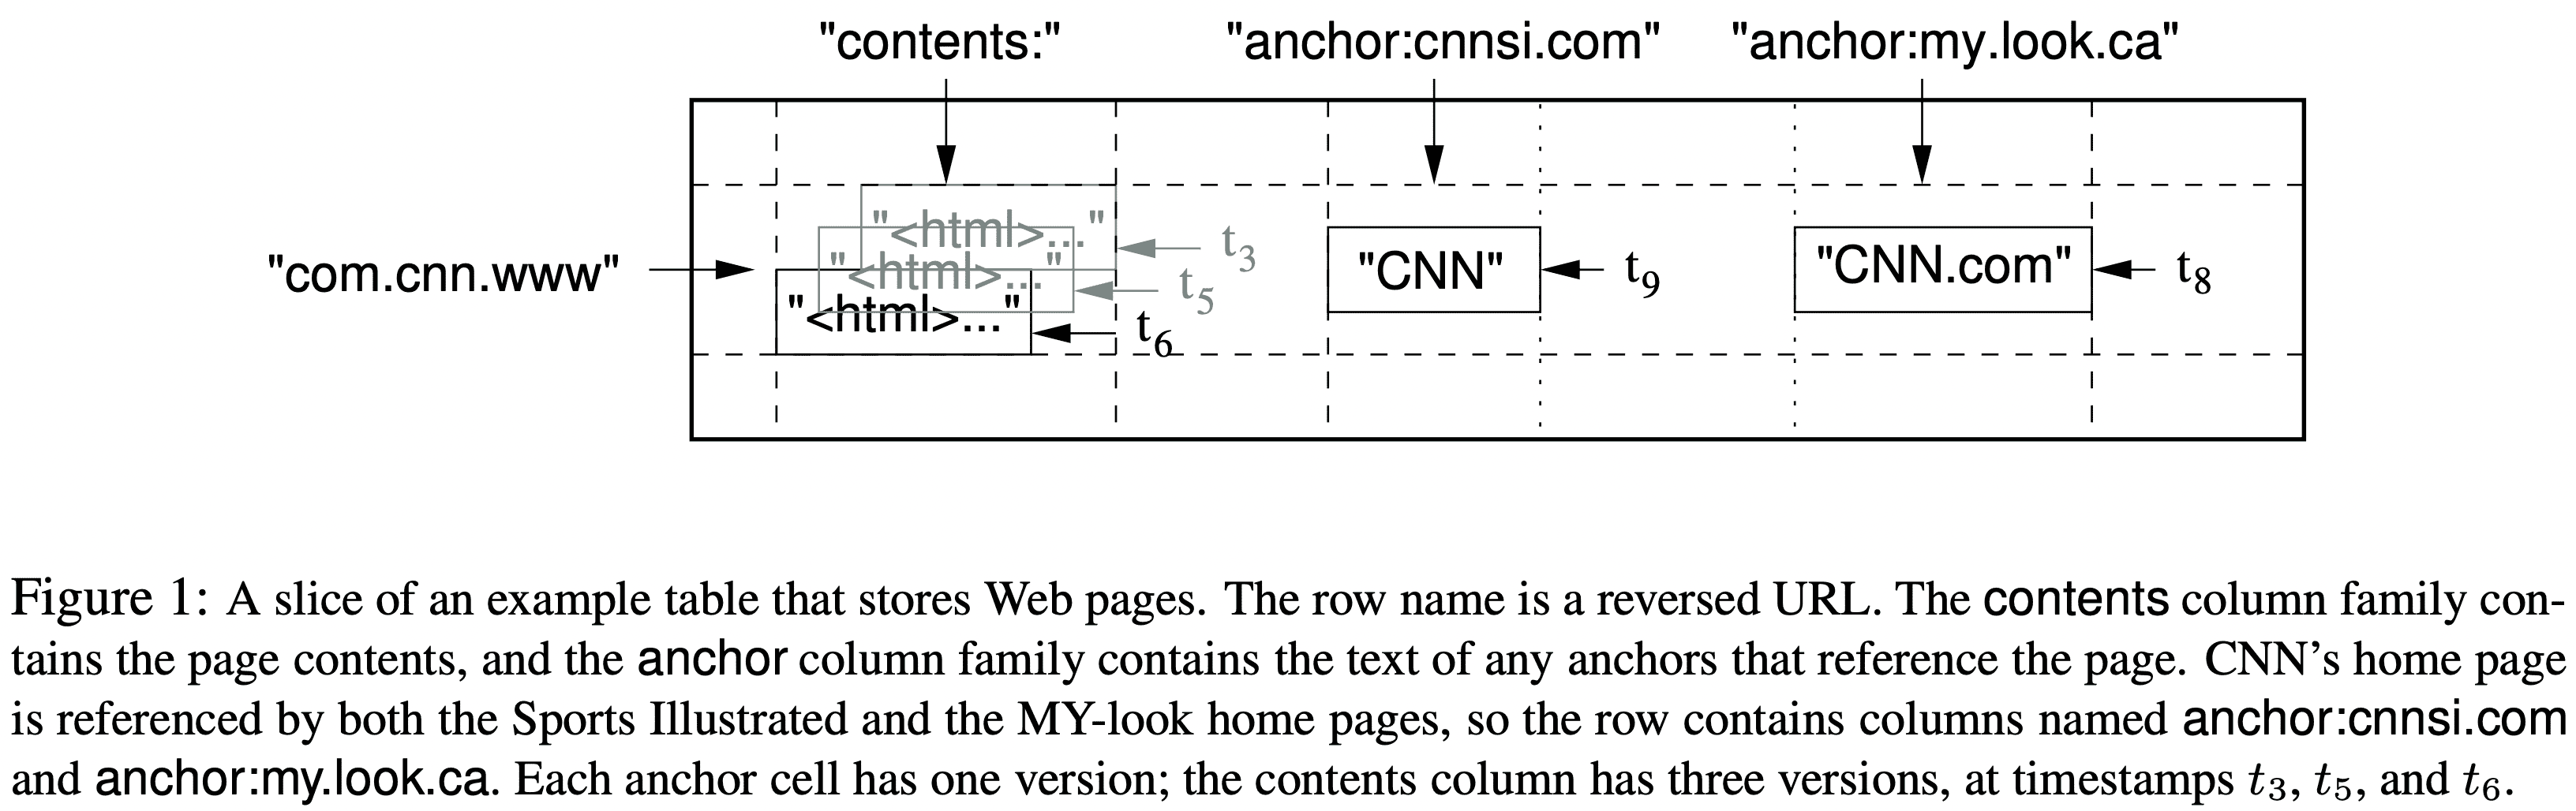 A slice of an example table that stores Web pages